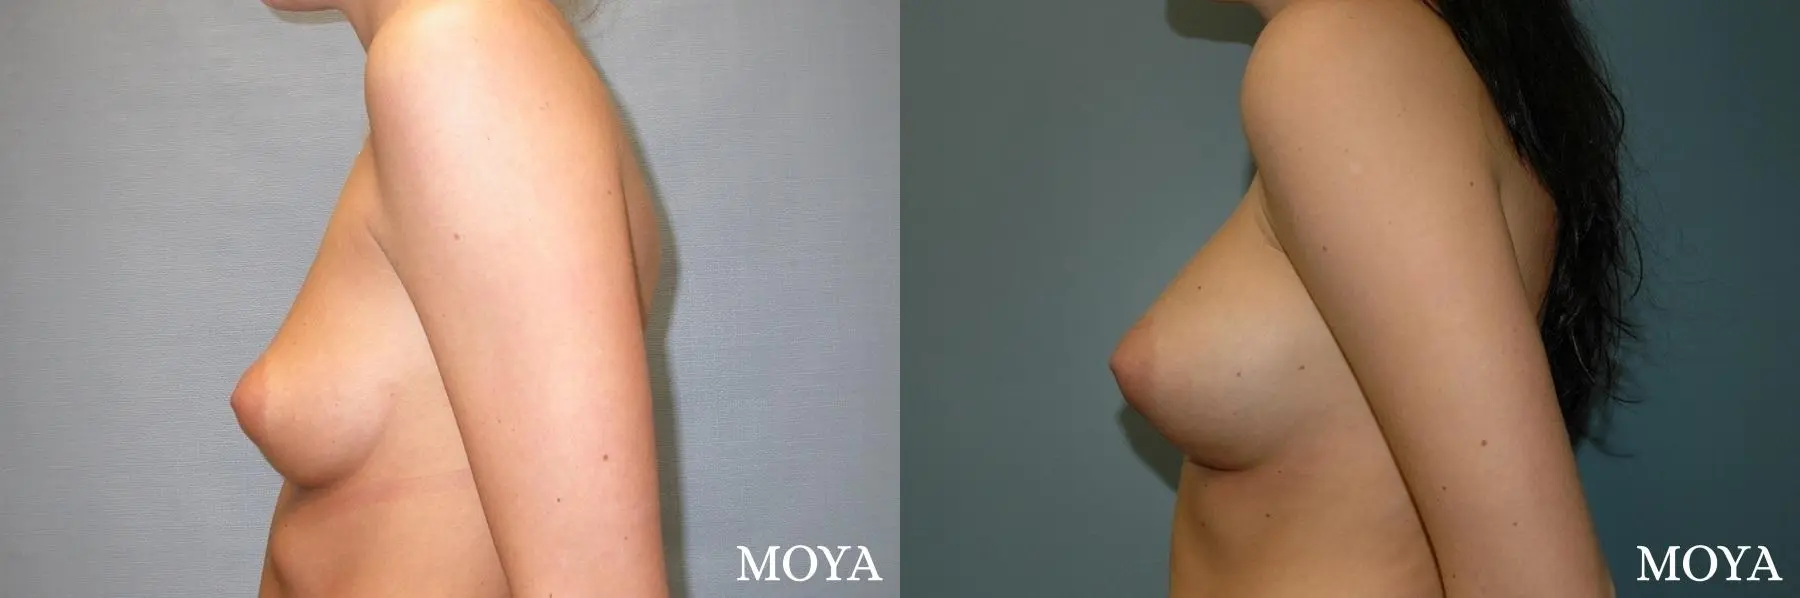 Breast Asymmetry: Patient 2 - Before and After 3